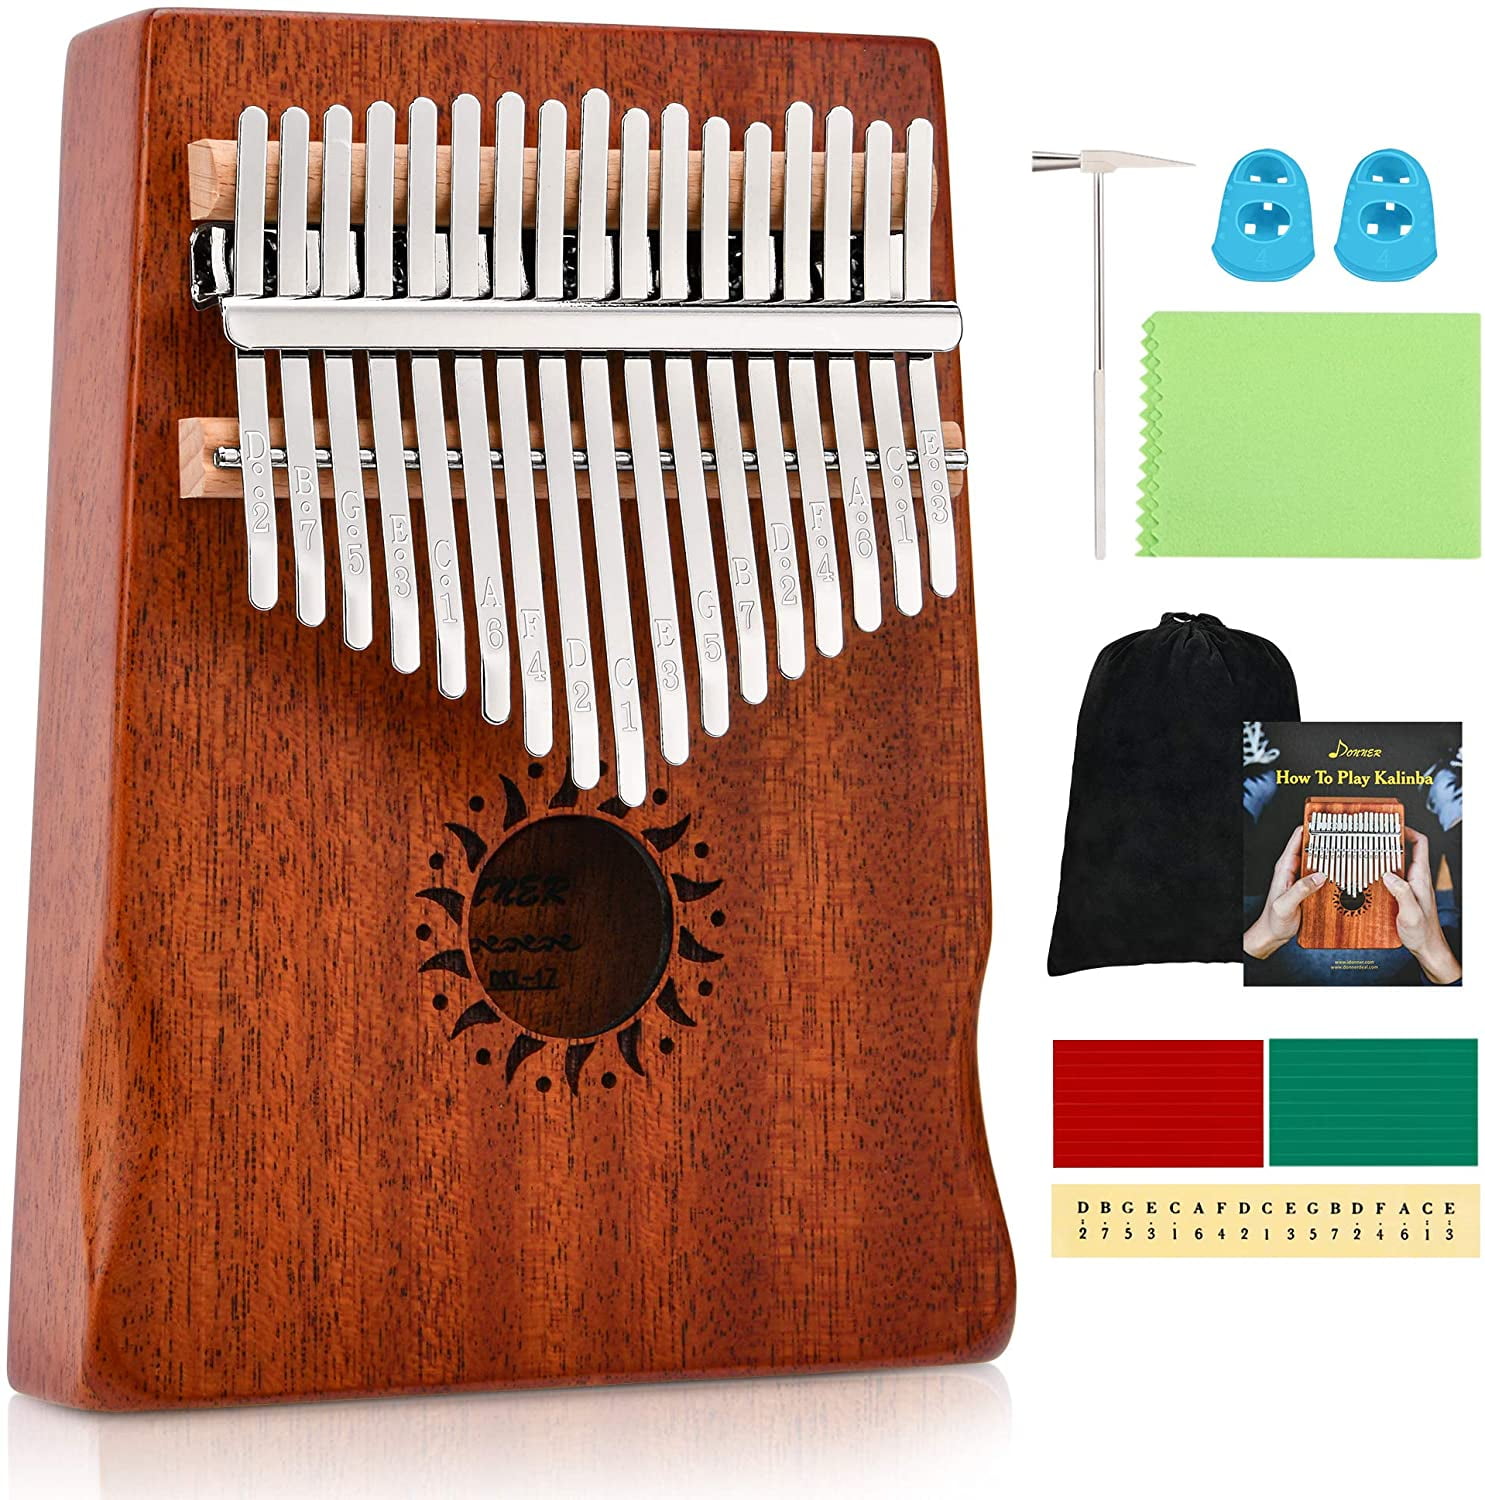 Kalimba Thumb Piano 17 Key Kalimba Finger Piano with Protective Box Gifts for Musicians Beginners Kids Tune Hammer Portable Mbira instruments for Adults Study Instruction 